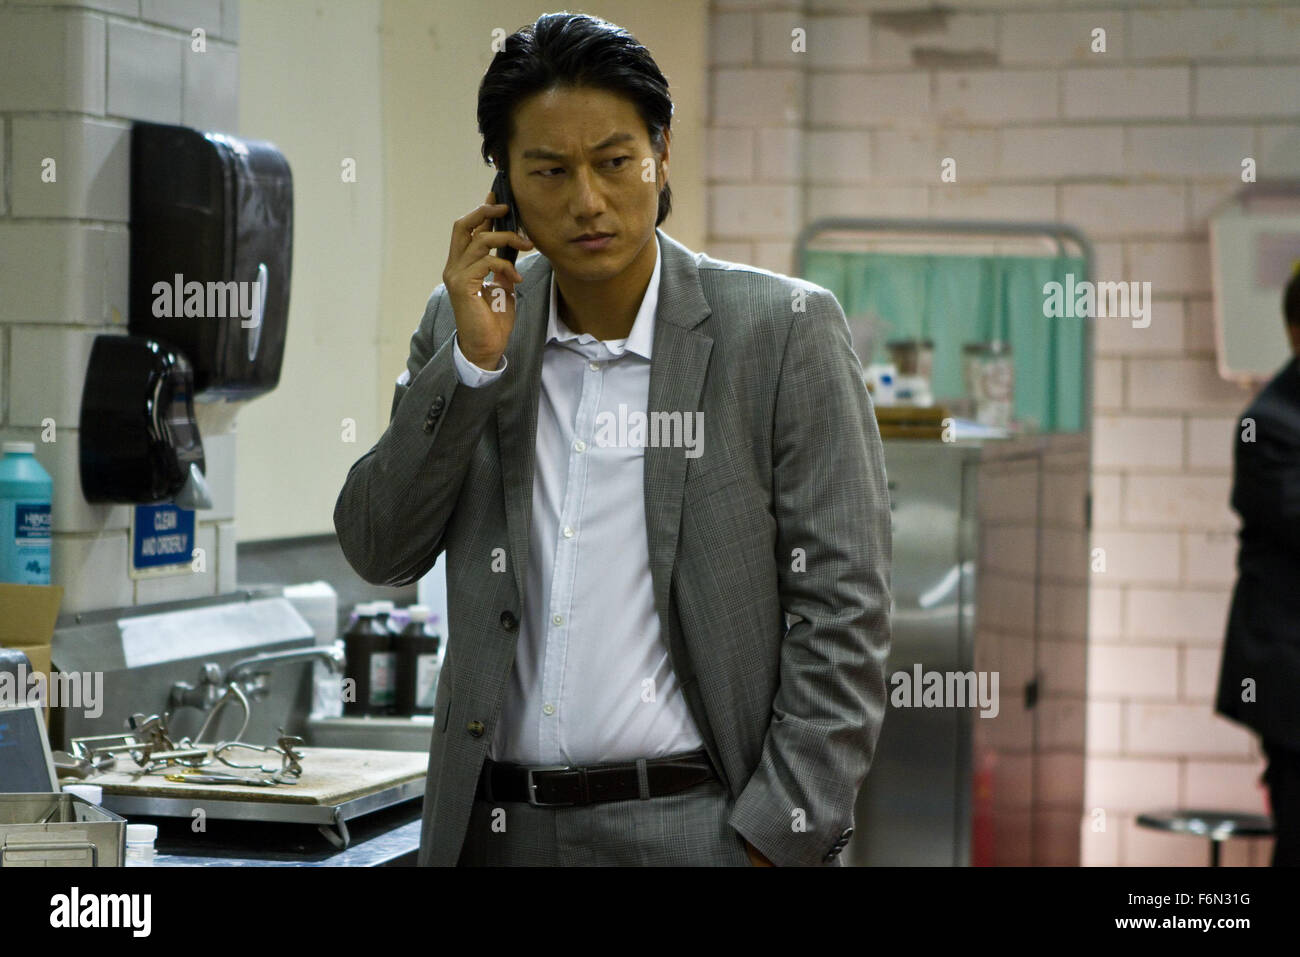 RELEASE DATE: February 1, 2013 TITLE: Bullet To The Head aka Shootout STUDIO: Dark Castle Entertainment DIRECTOR: Walter Hill PLOT: After watching their respective partners die, a New Orleans hitman and a Washington D.C. detective form an alliance in order to bring down their common enemy PICTURED: SUNG KANG as Detective Taylor Kwon (Credit: c Dark Castle Entertainment/Entertainment Pictures) Stock Photo